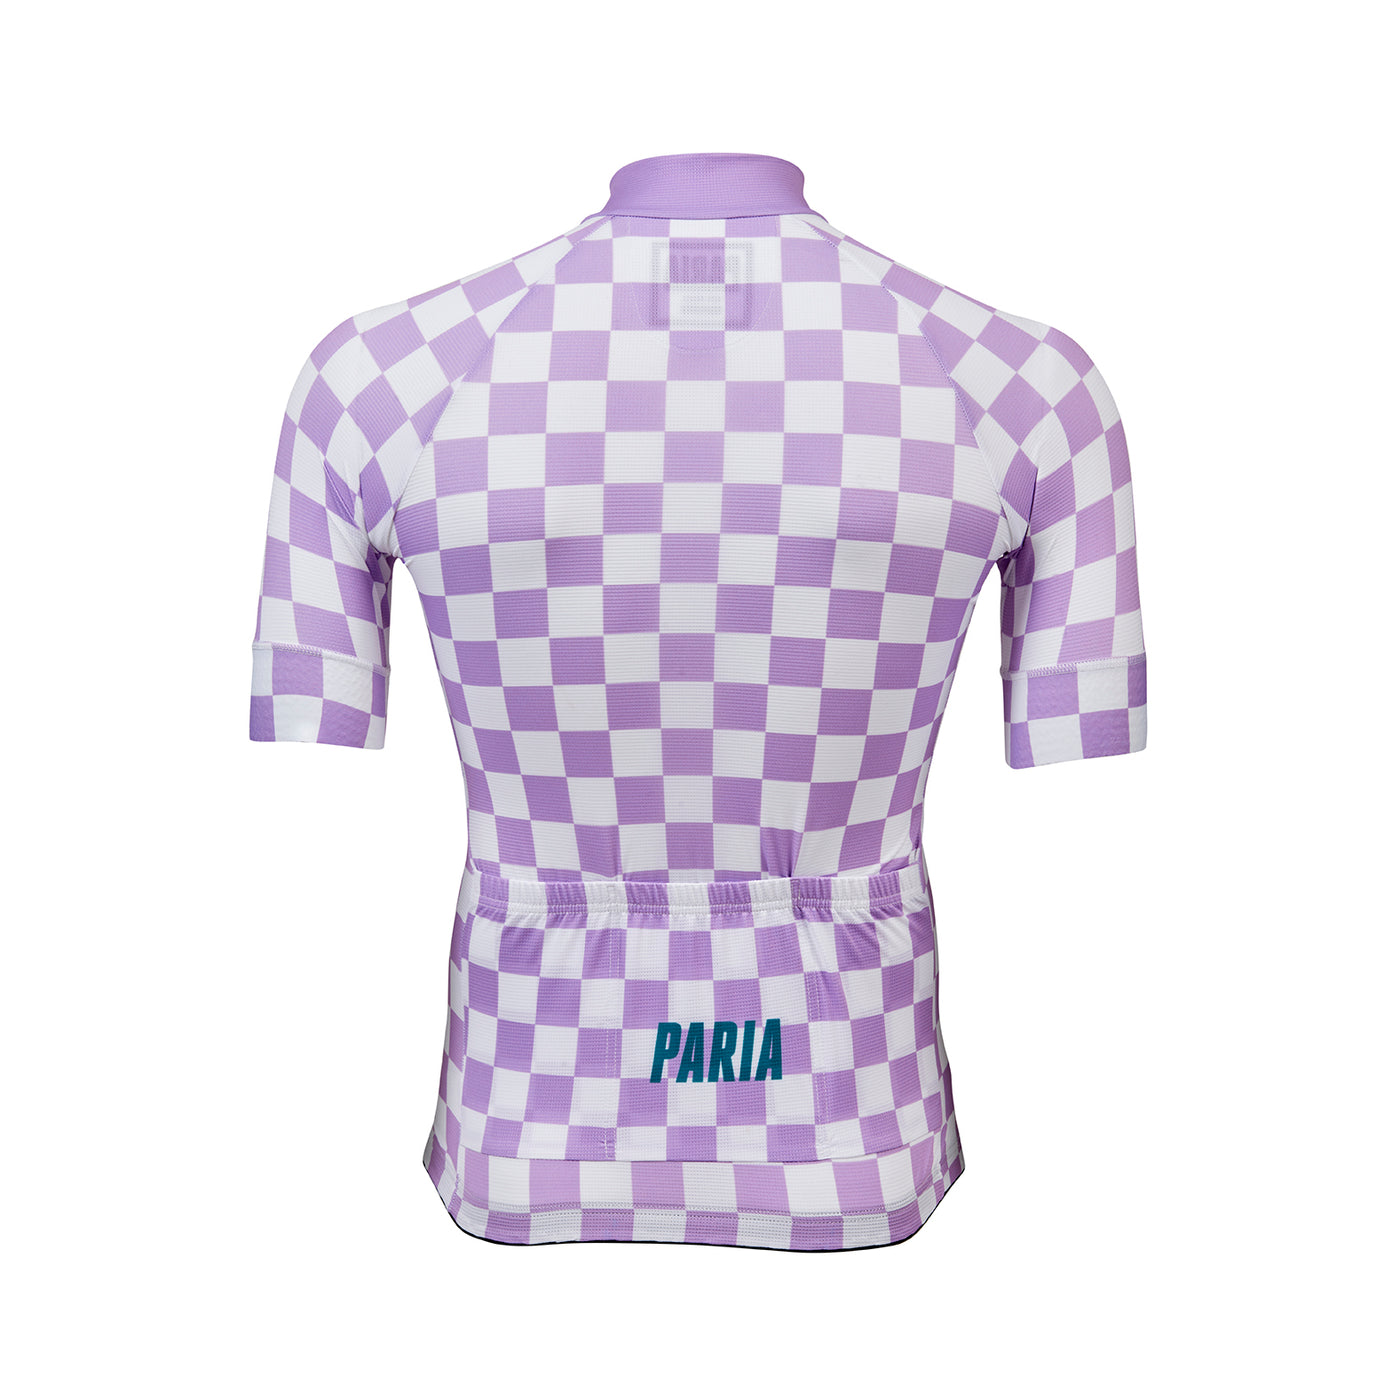 Wreckerboard Checked Men's Cycling Jersey Lilac